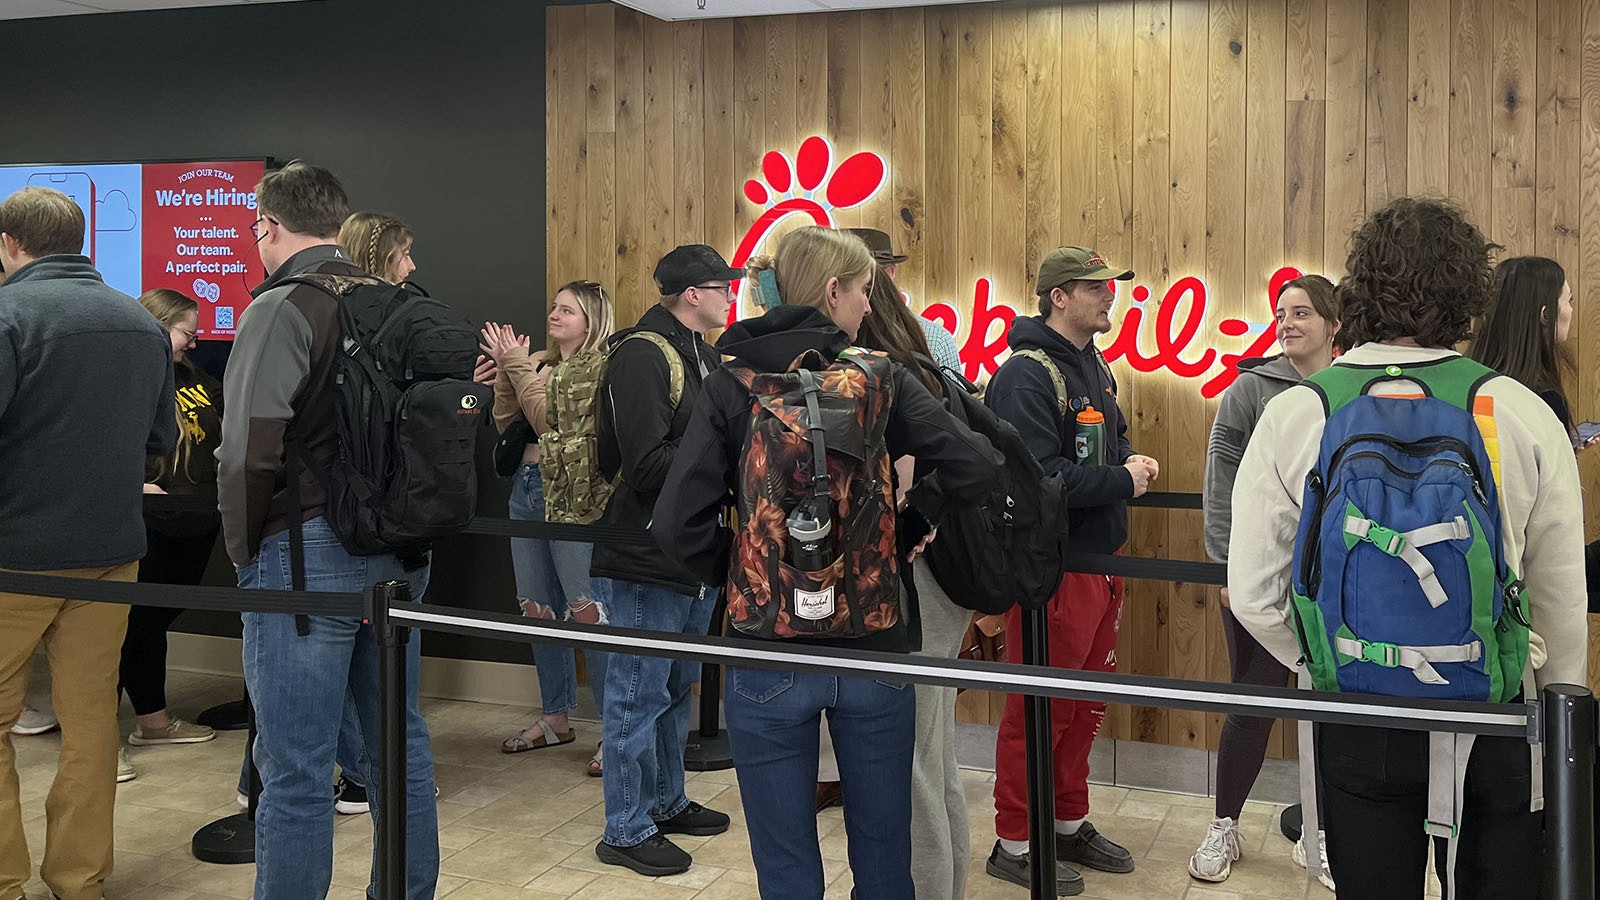 University of Wyoming students and others packed into the UW Union on Thursday to grab lunch at a newly-opened Chick-Fil-A outlet, the second one in Wyoming.